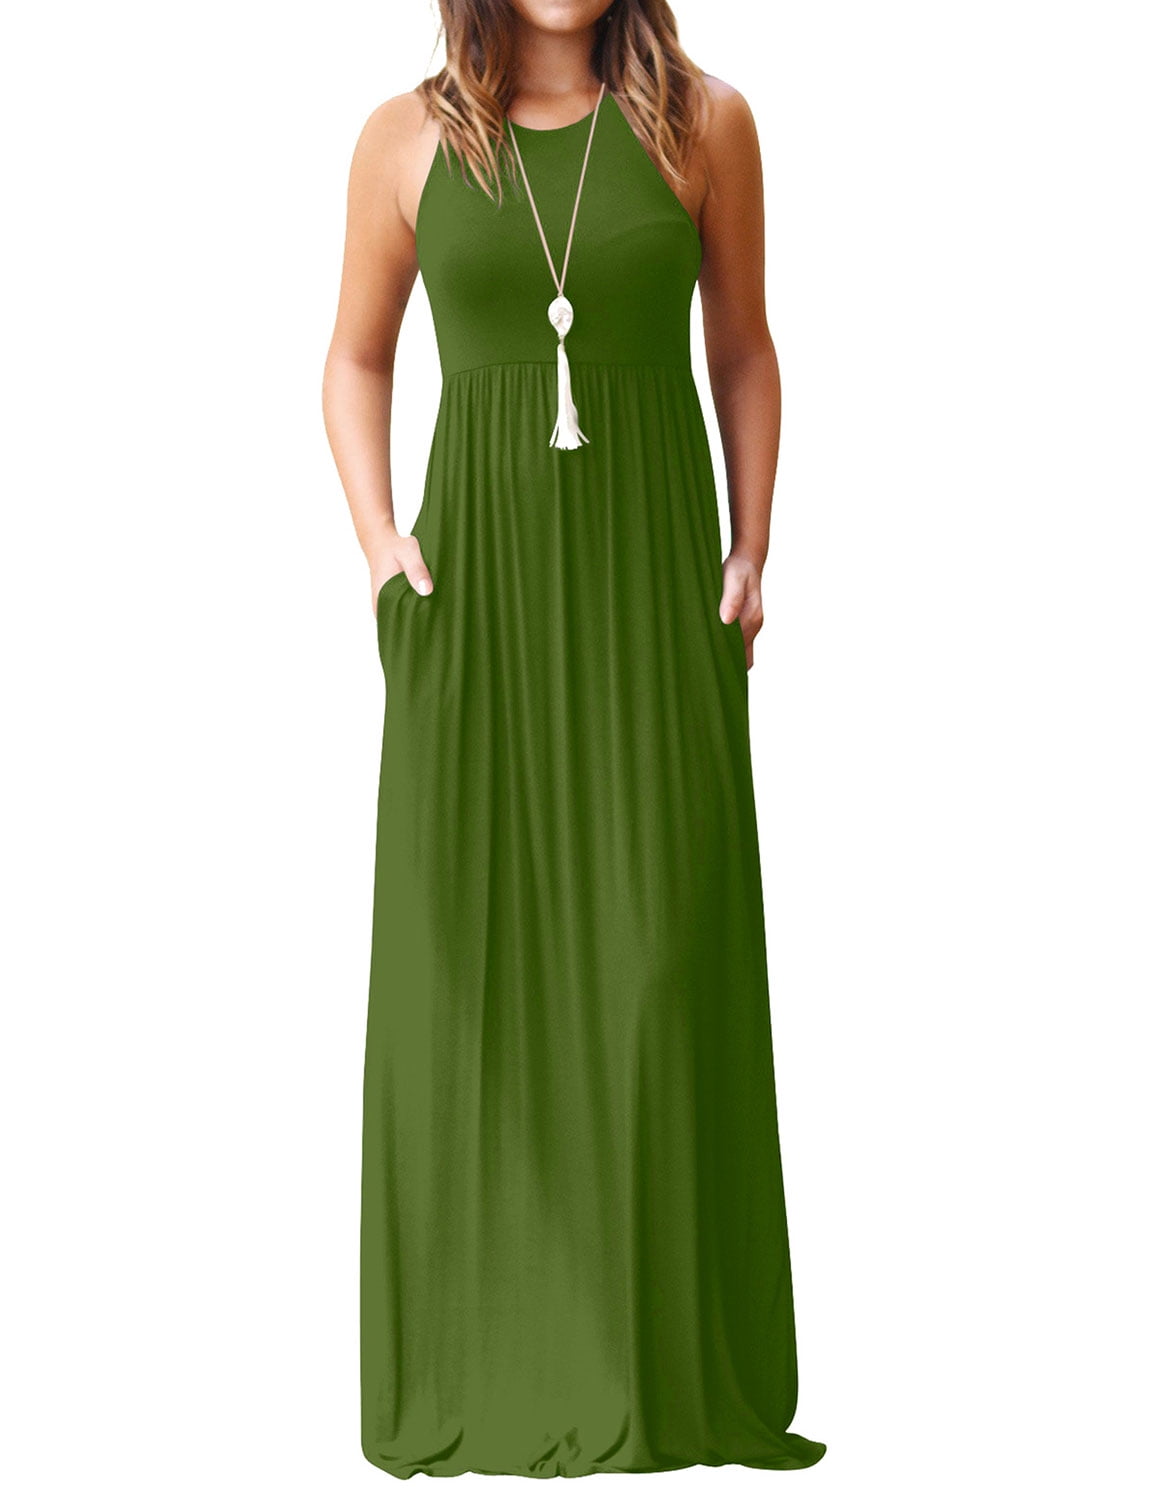 ZXZY - Women Round Neck Sleeveless Pure Color Long Dress with Pocket ...